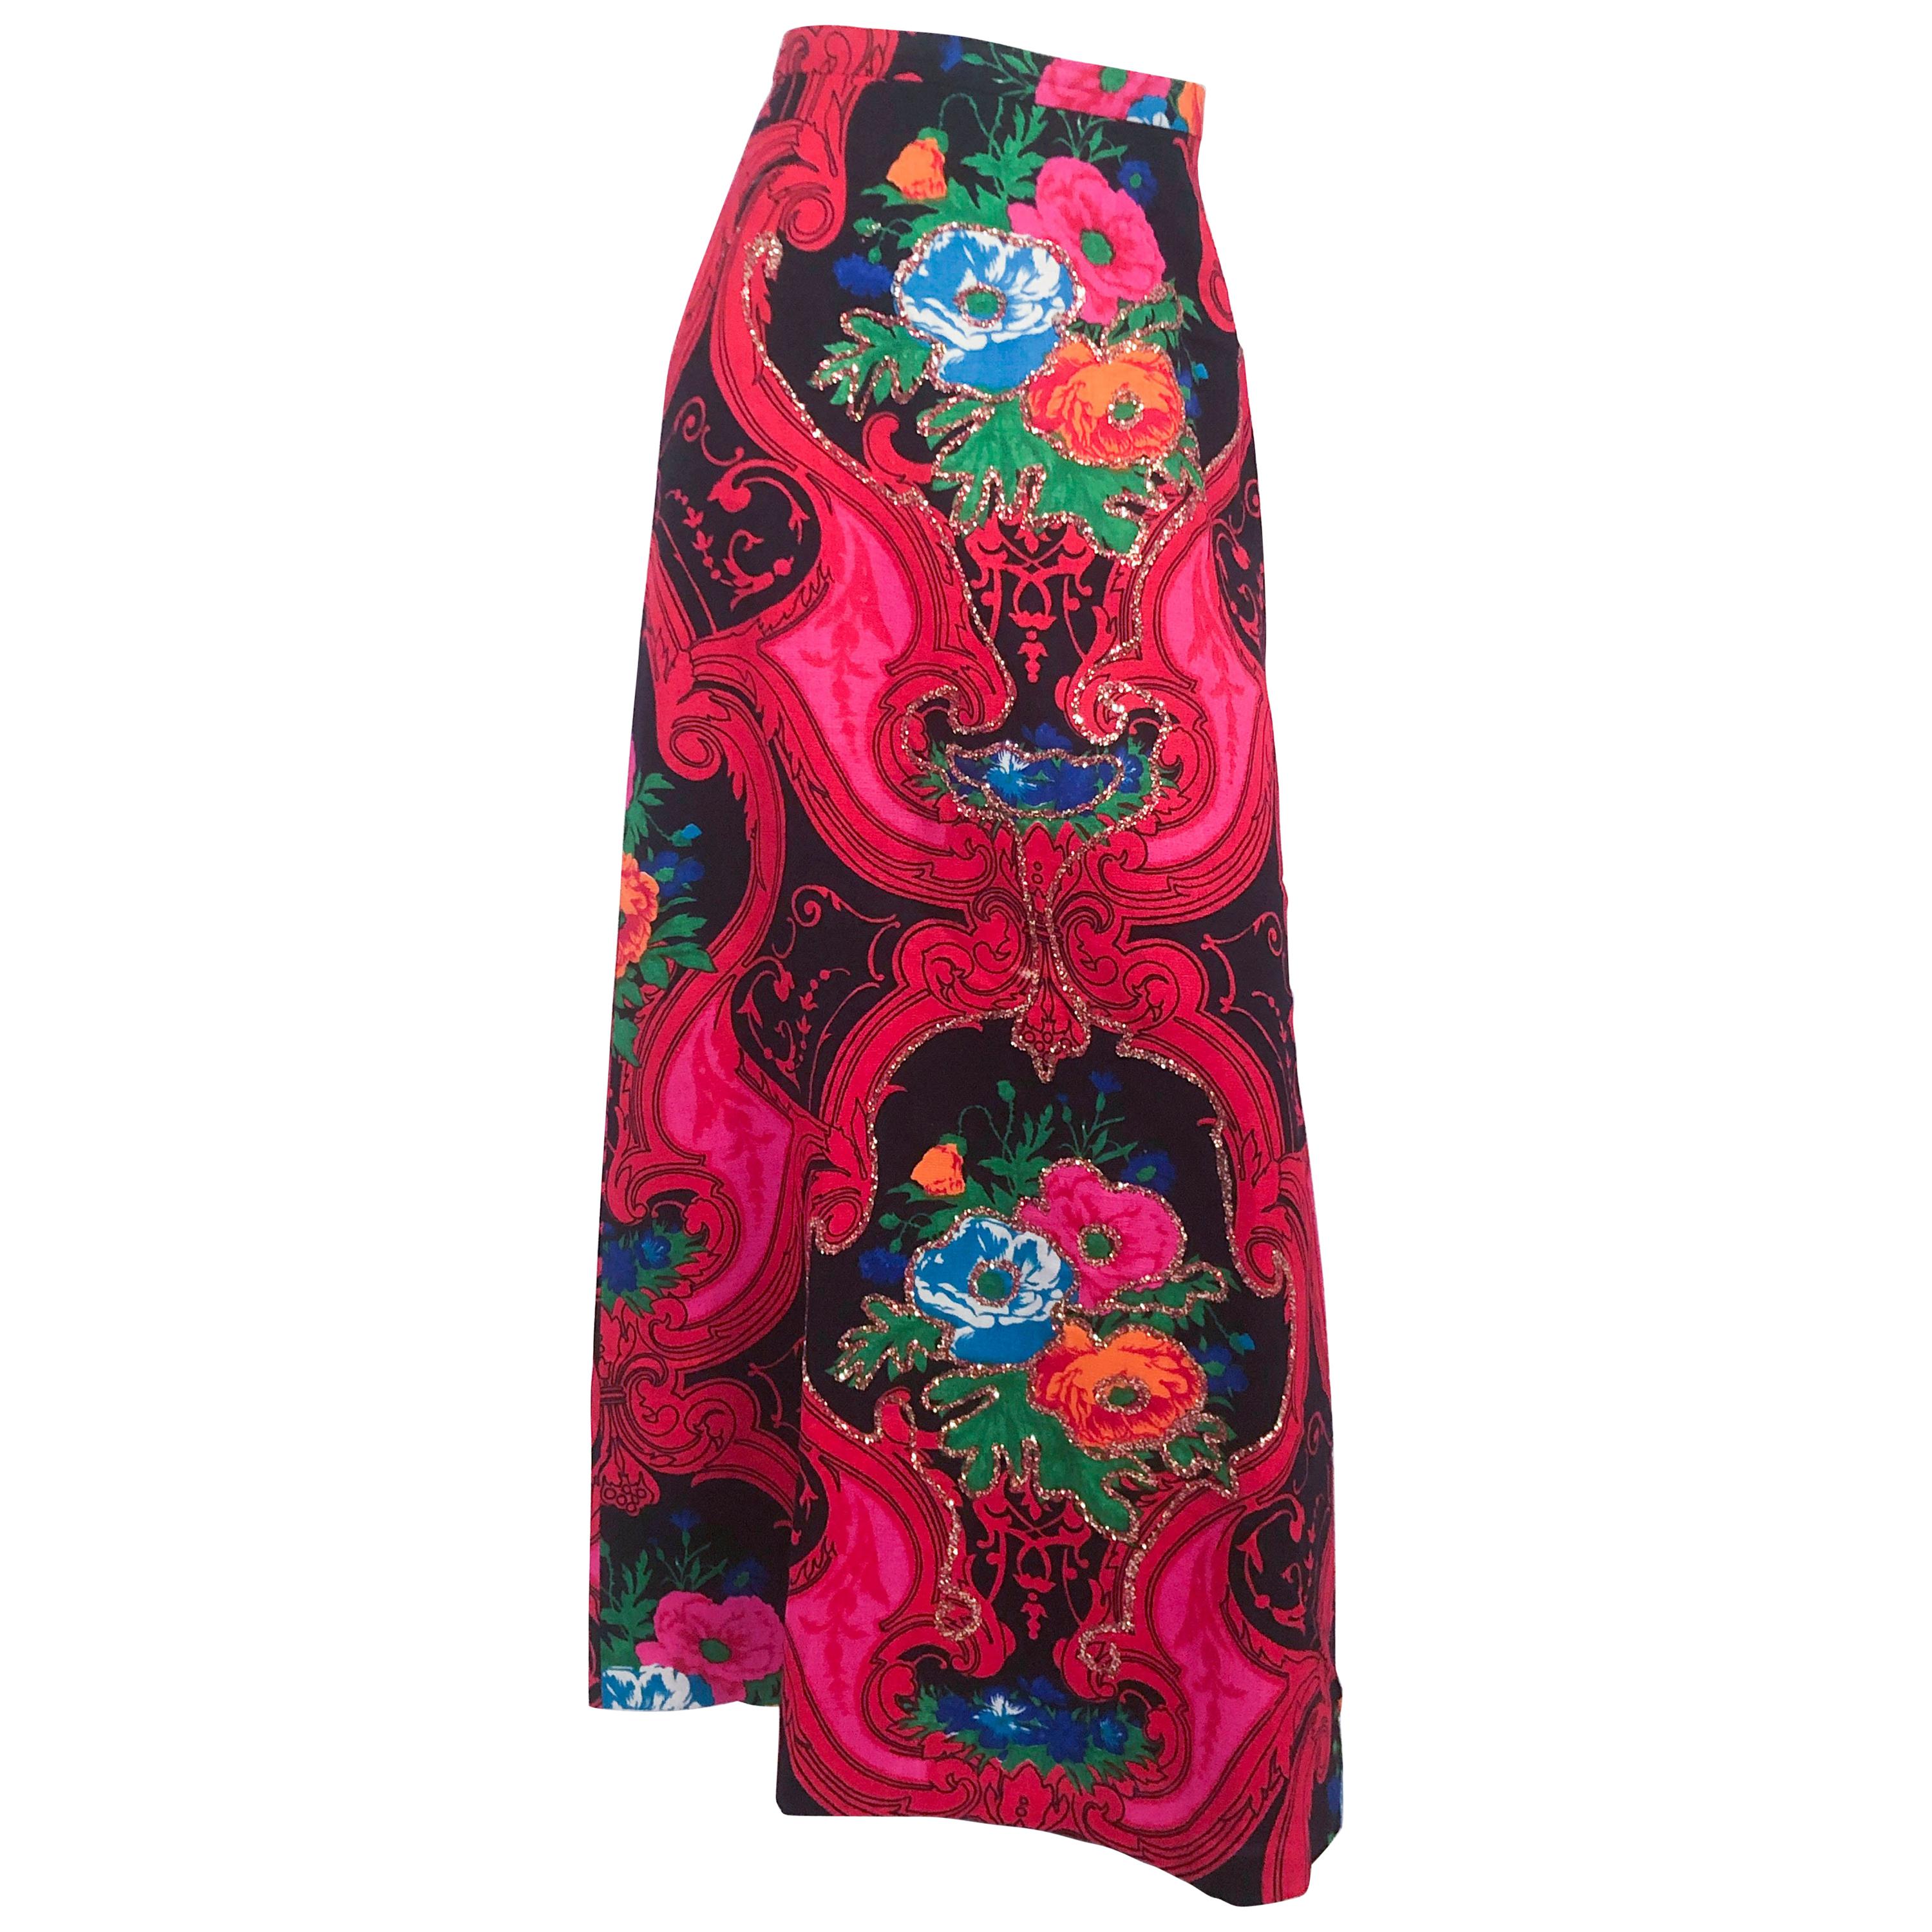 1960s Saks Fifth Ave Psychedelic Printed Skirt With Glitter Detail For Sale